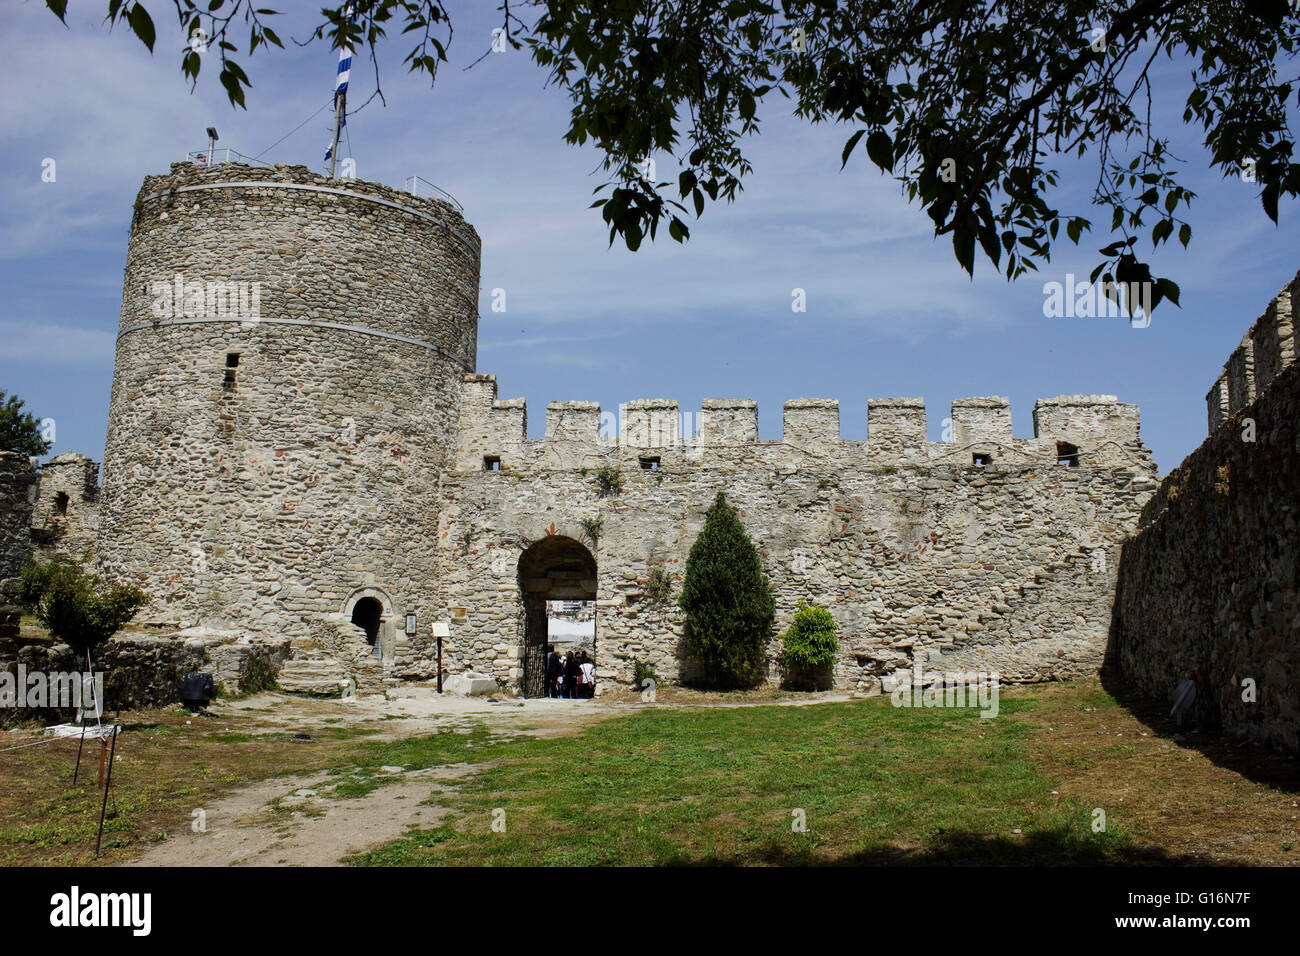 Kavala's central circular castle tower of the citadel with battlements and walkways. Greece. Stock Photo